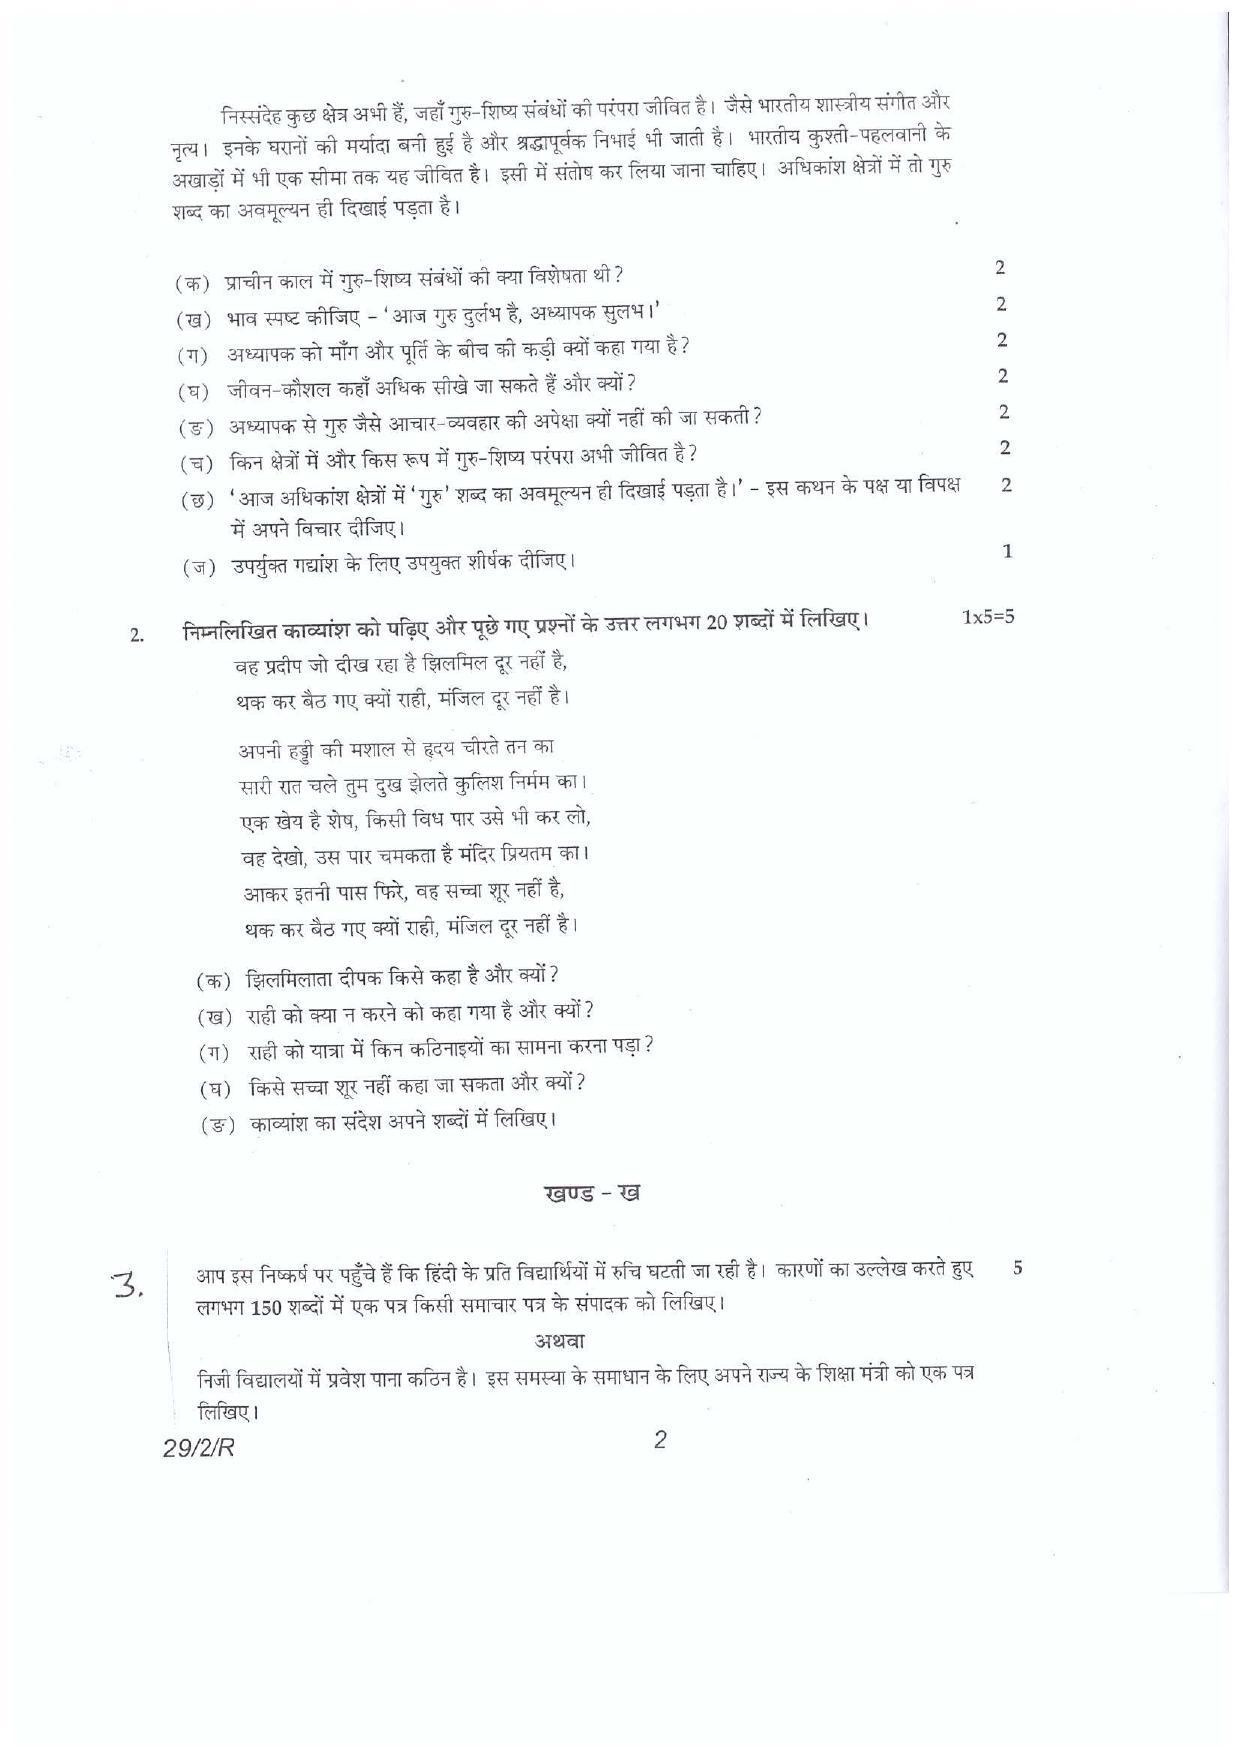 CBSE Class 12 29-2R  HINDI ELECTIVE (SGN) 2018 Question Paper - Page 2